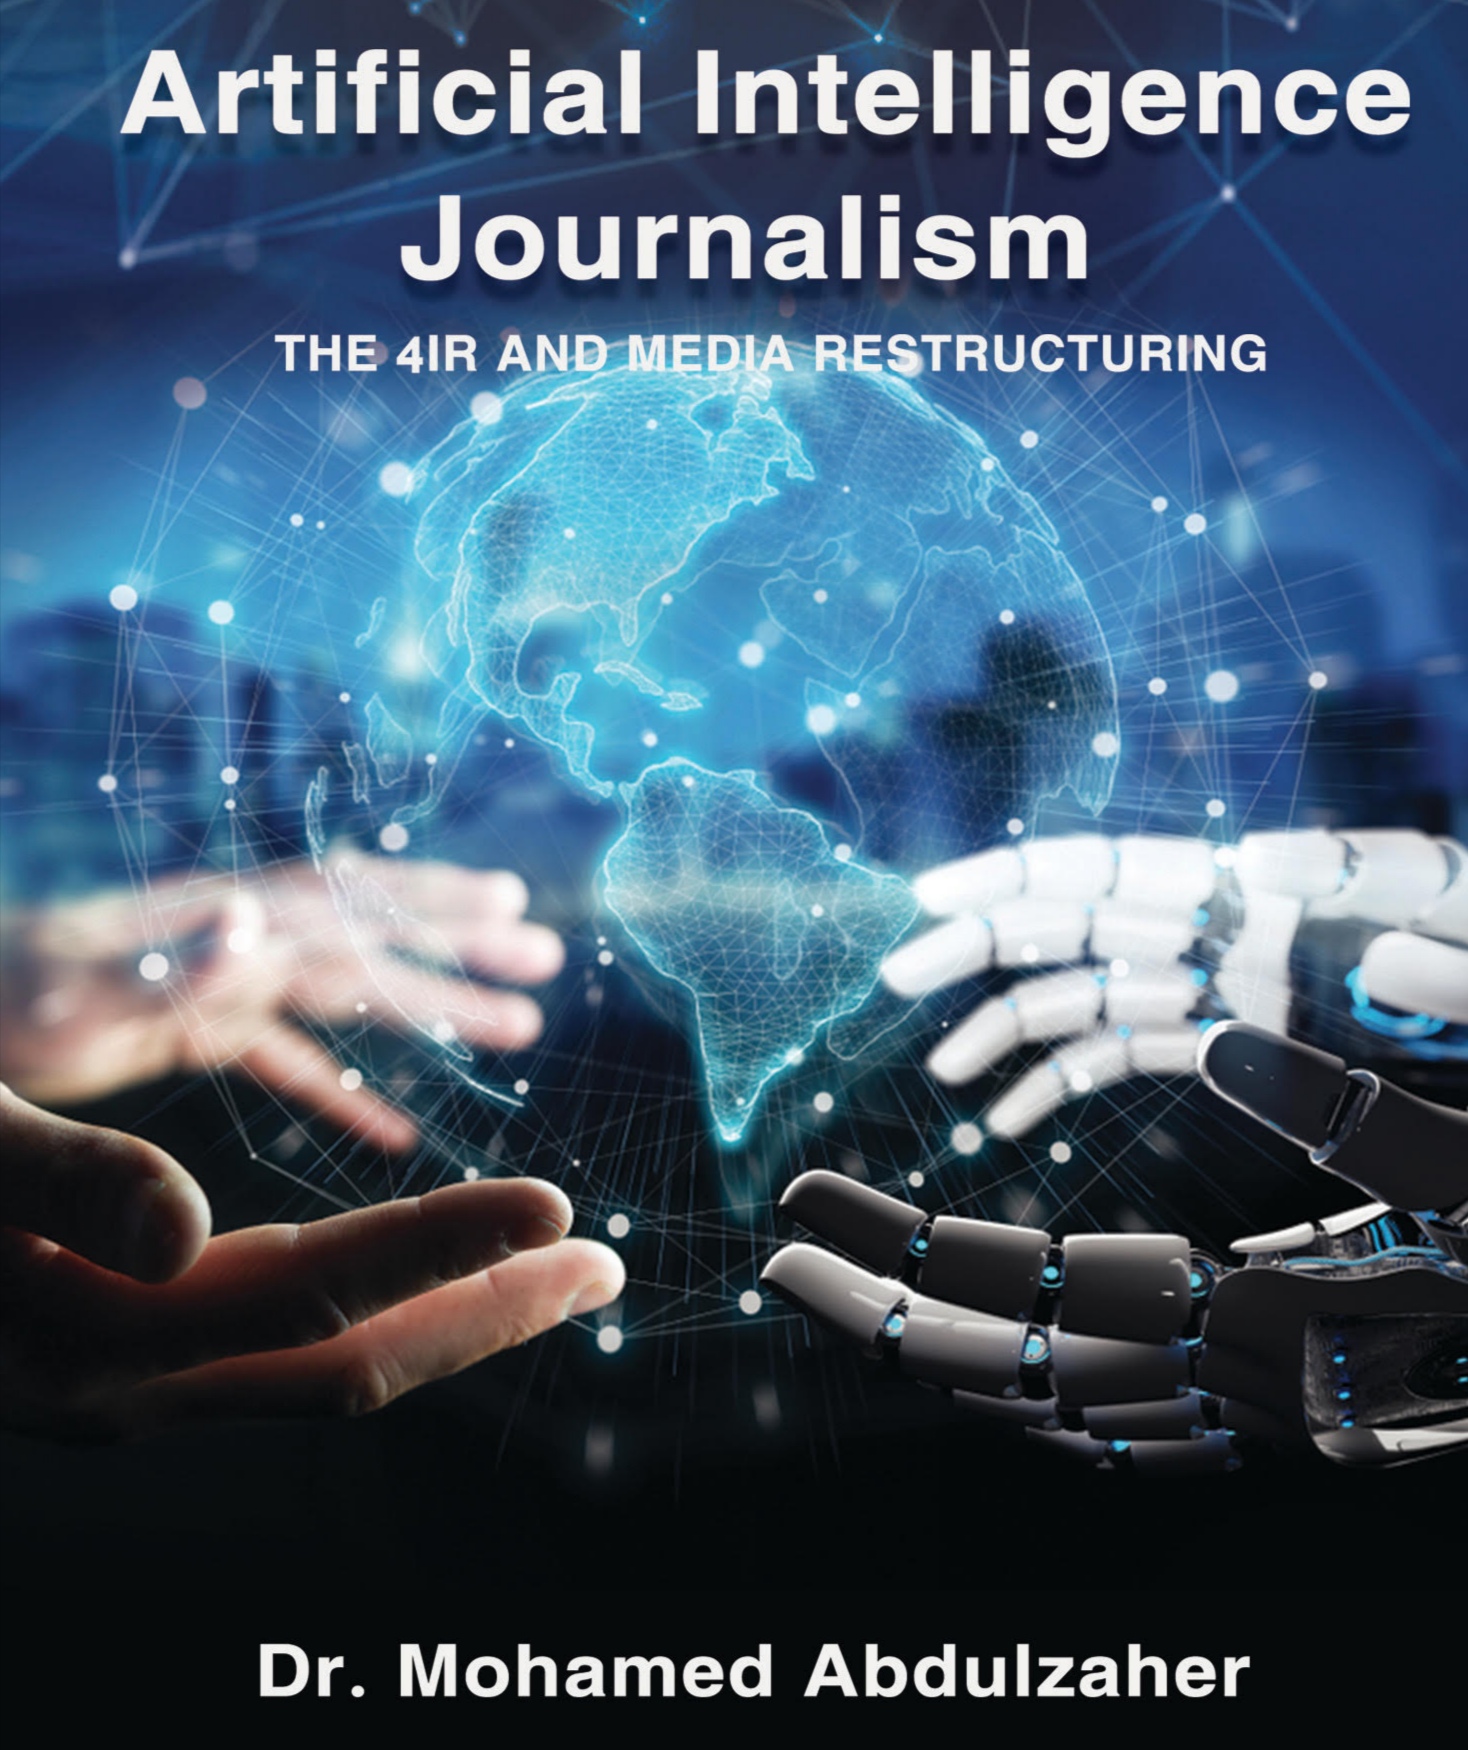 first AI Journalism and Media Restructuring book